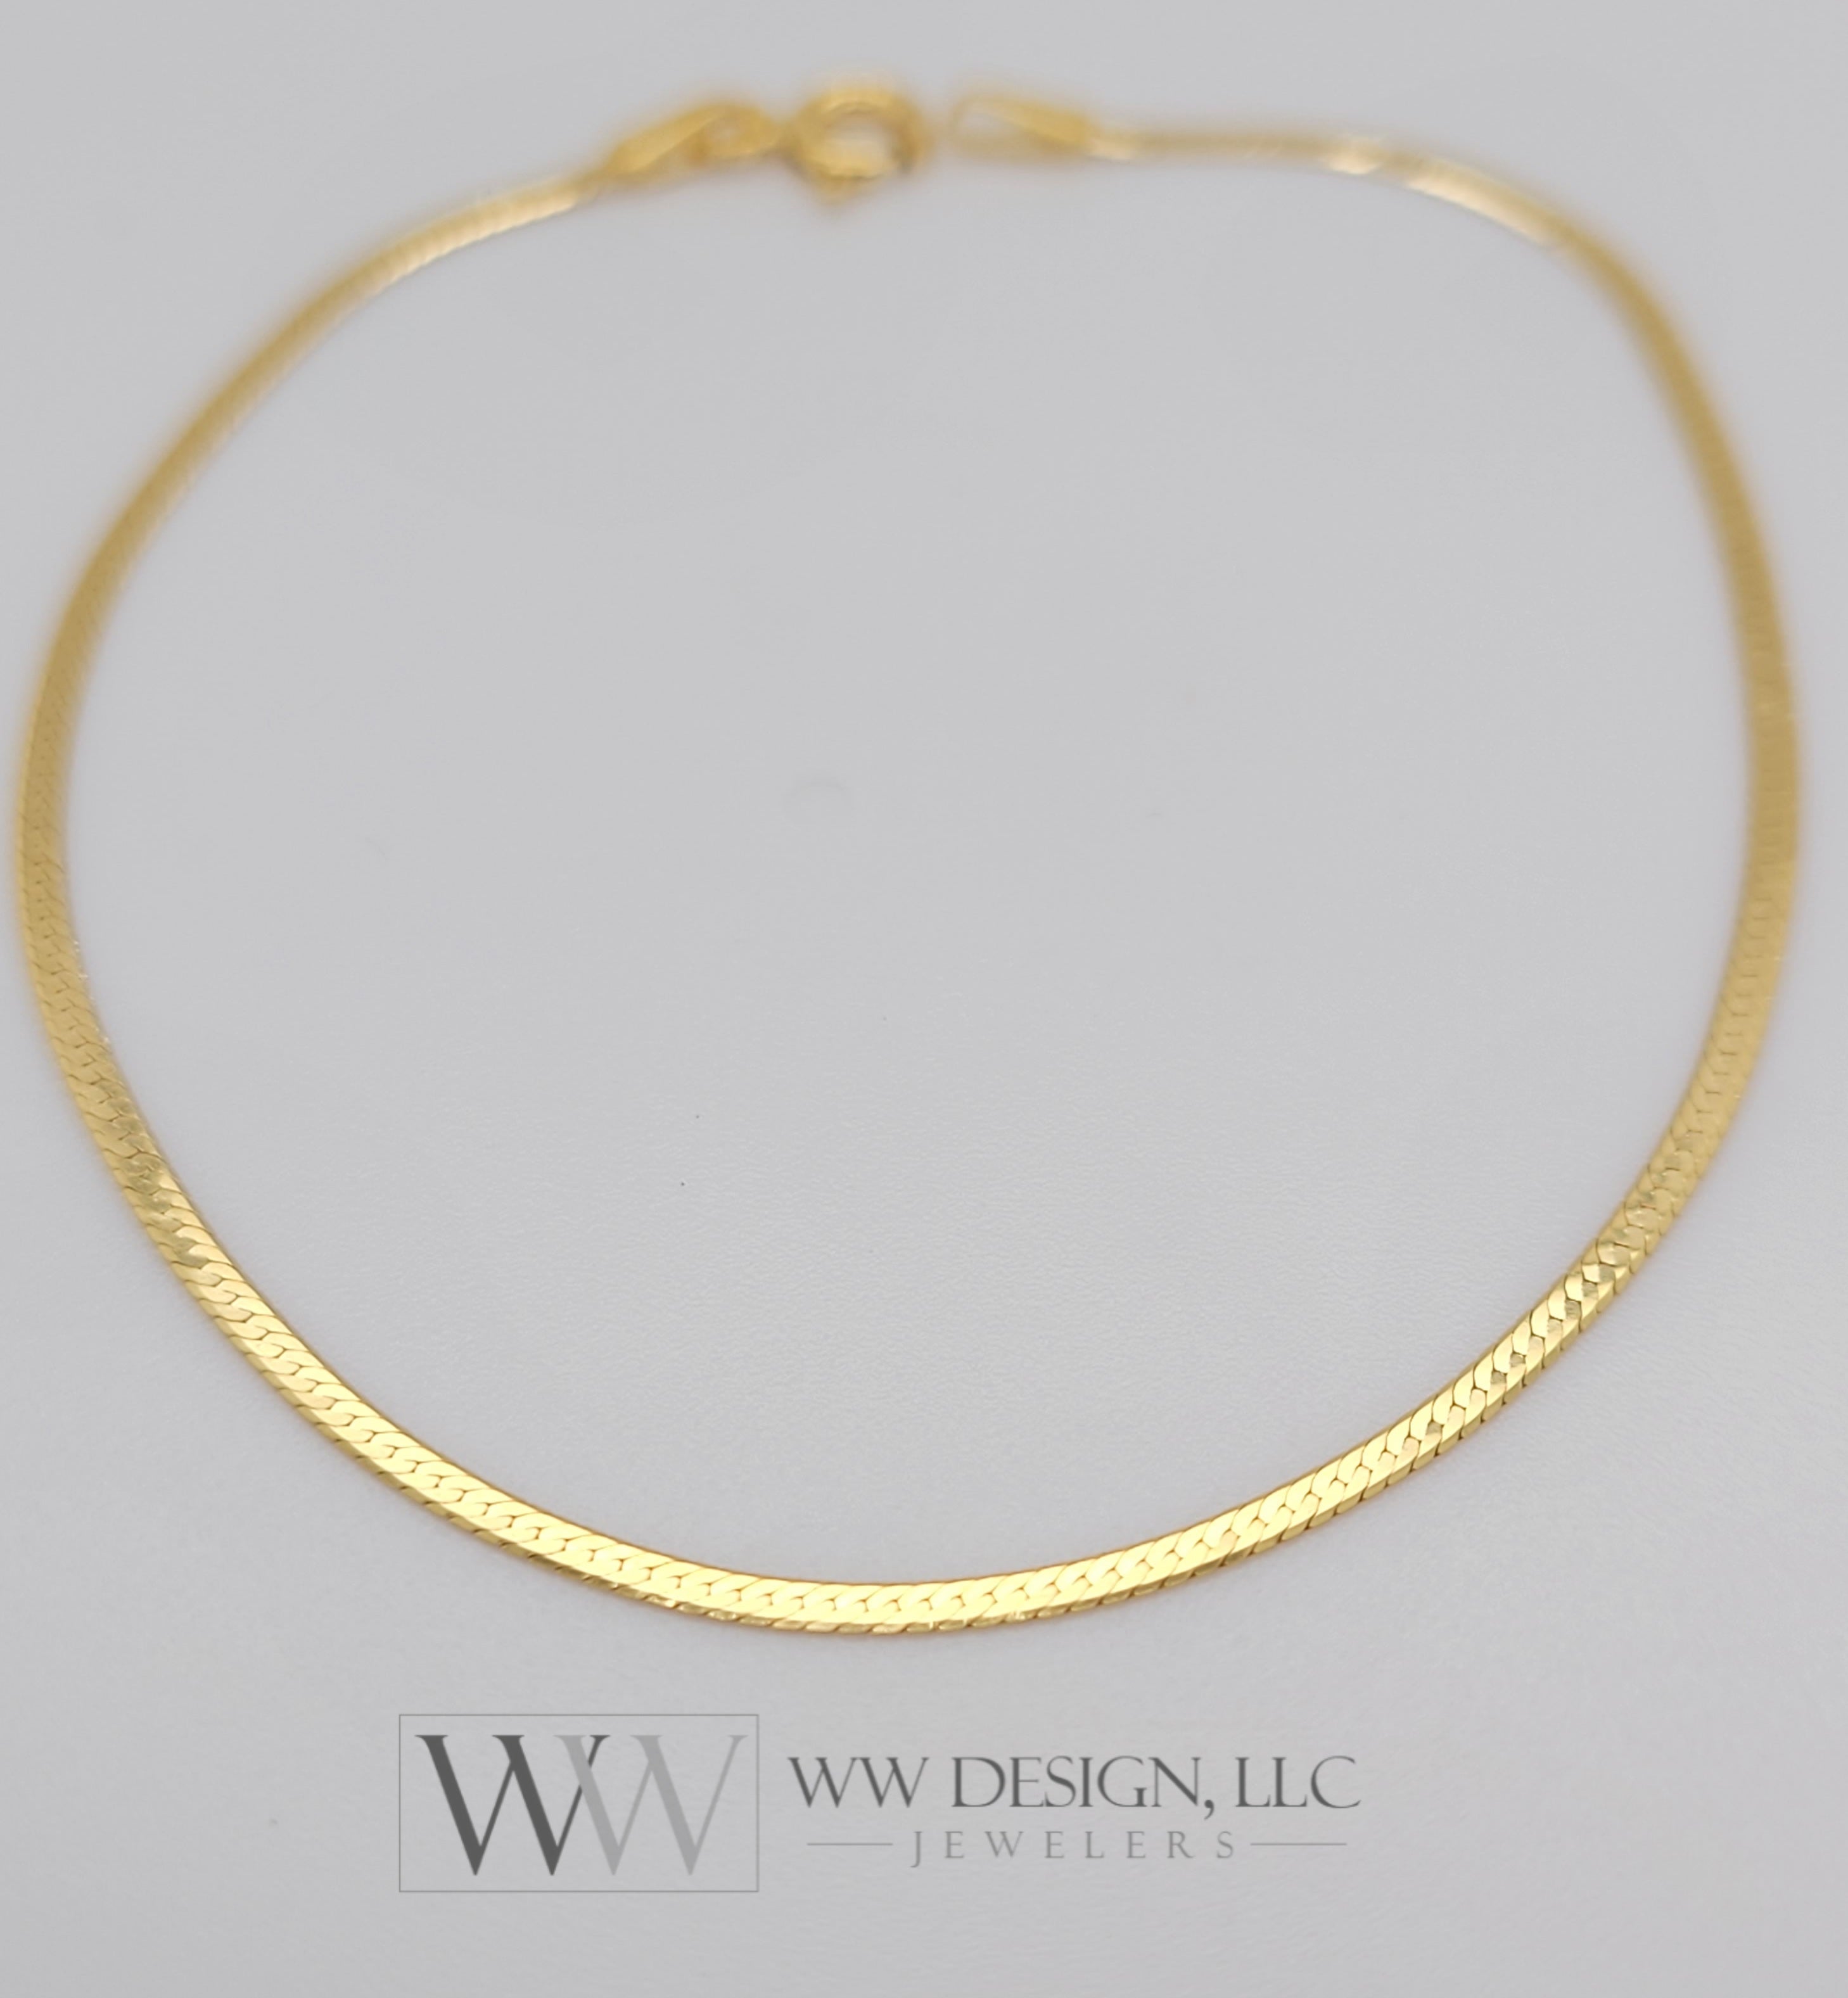 1.5mm Flexible Herringbone Chain 7" Chain Bracelet with Spring Clasp - 14K Yellow Gold